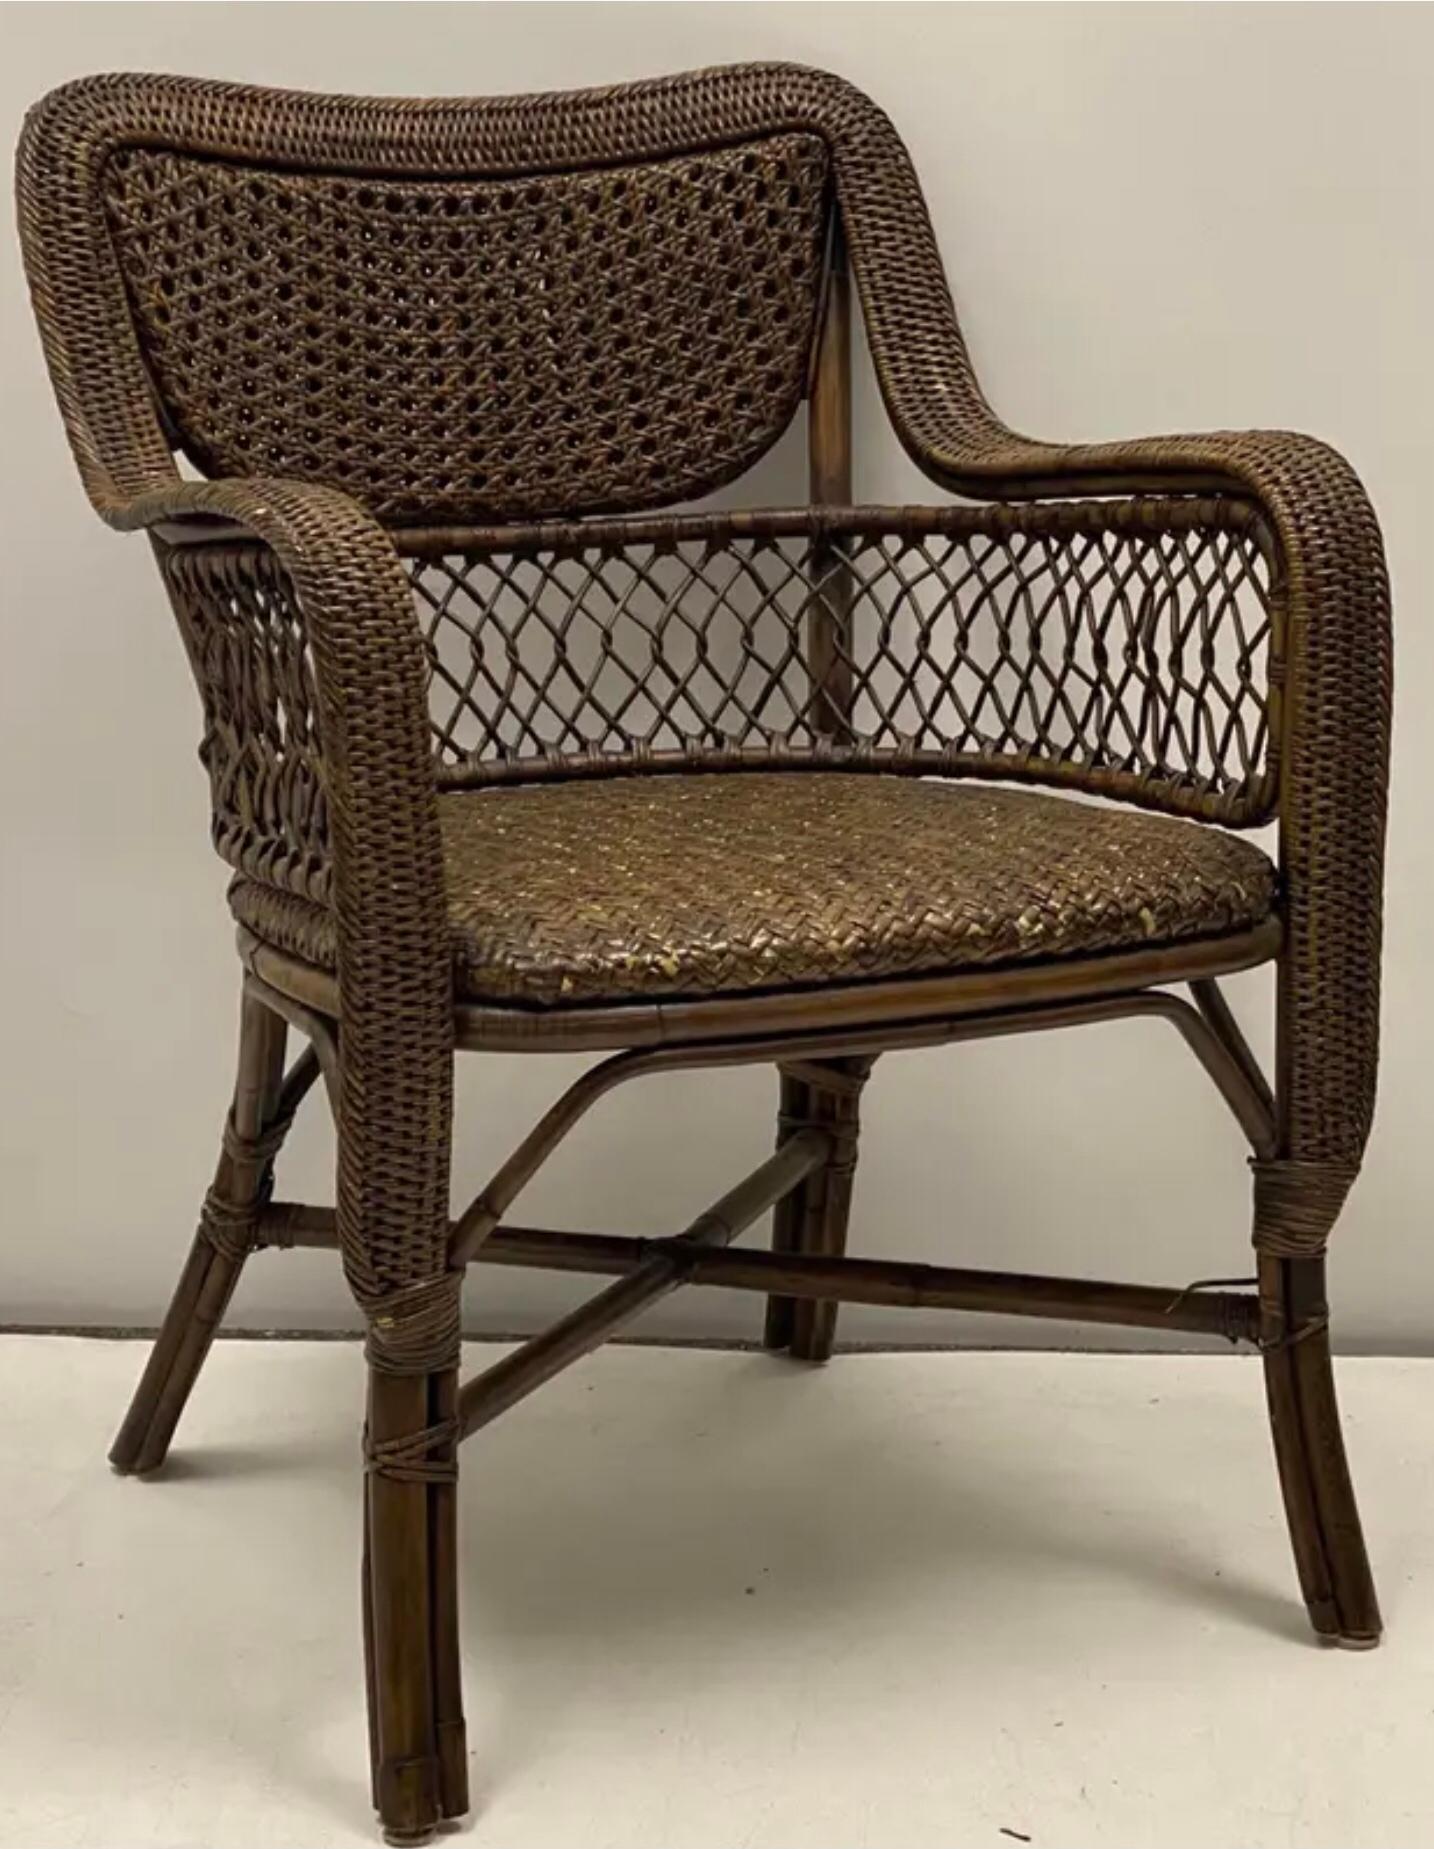 American 1980s British Colonial Style Wicker & Caned Chairs by Palecek, Pair